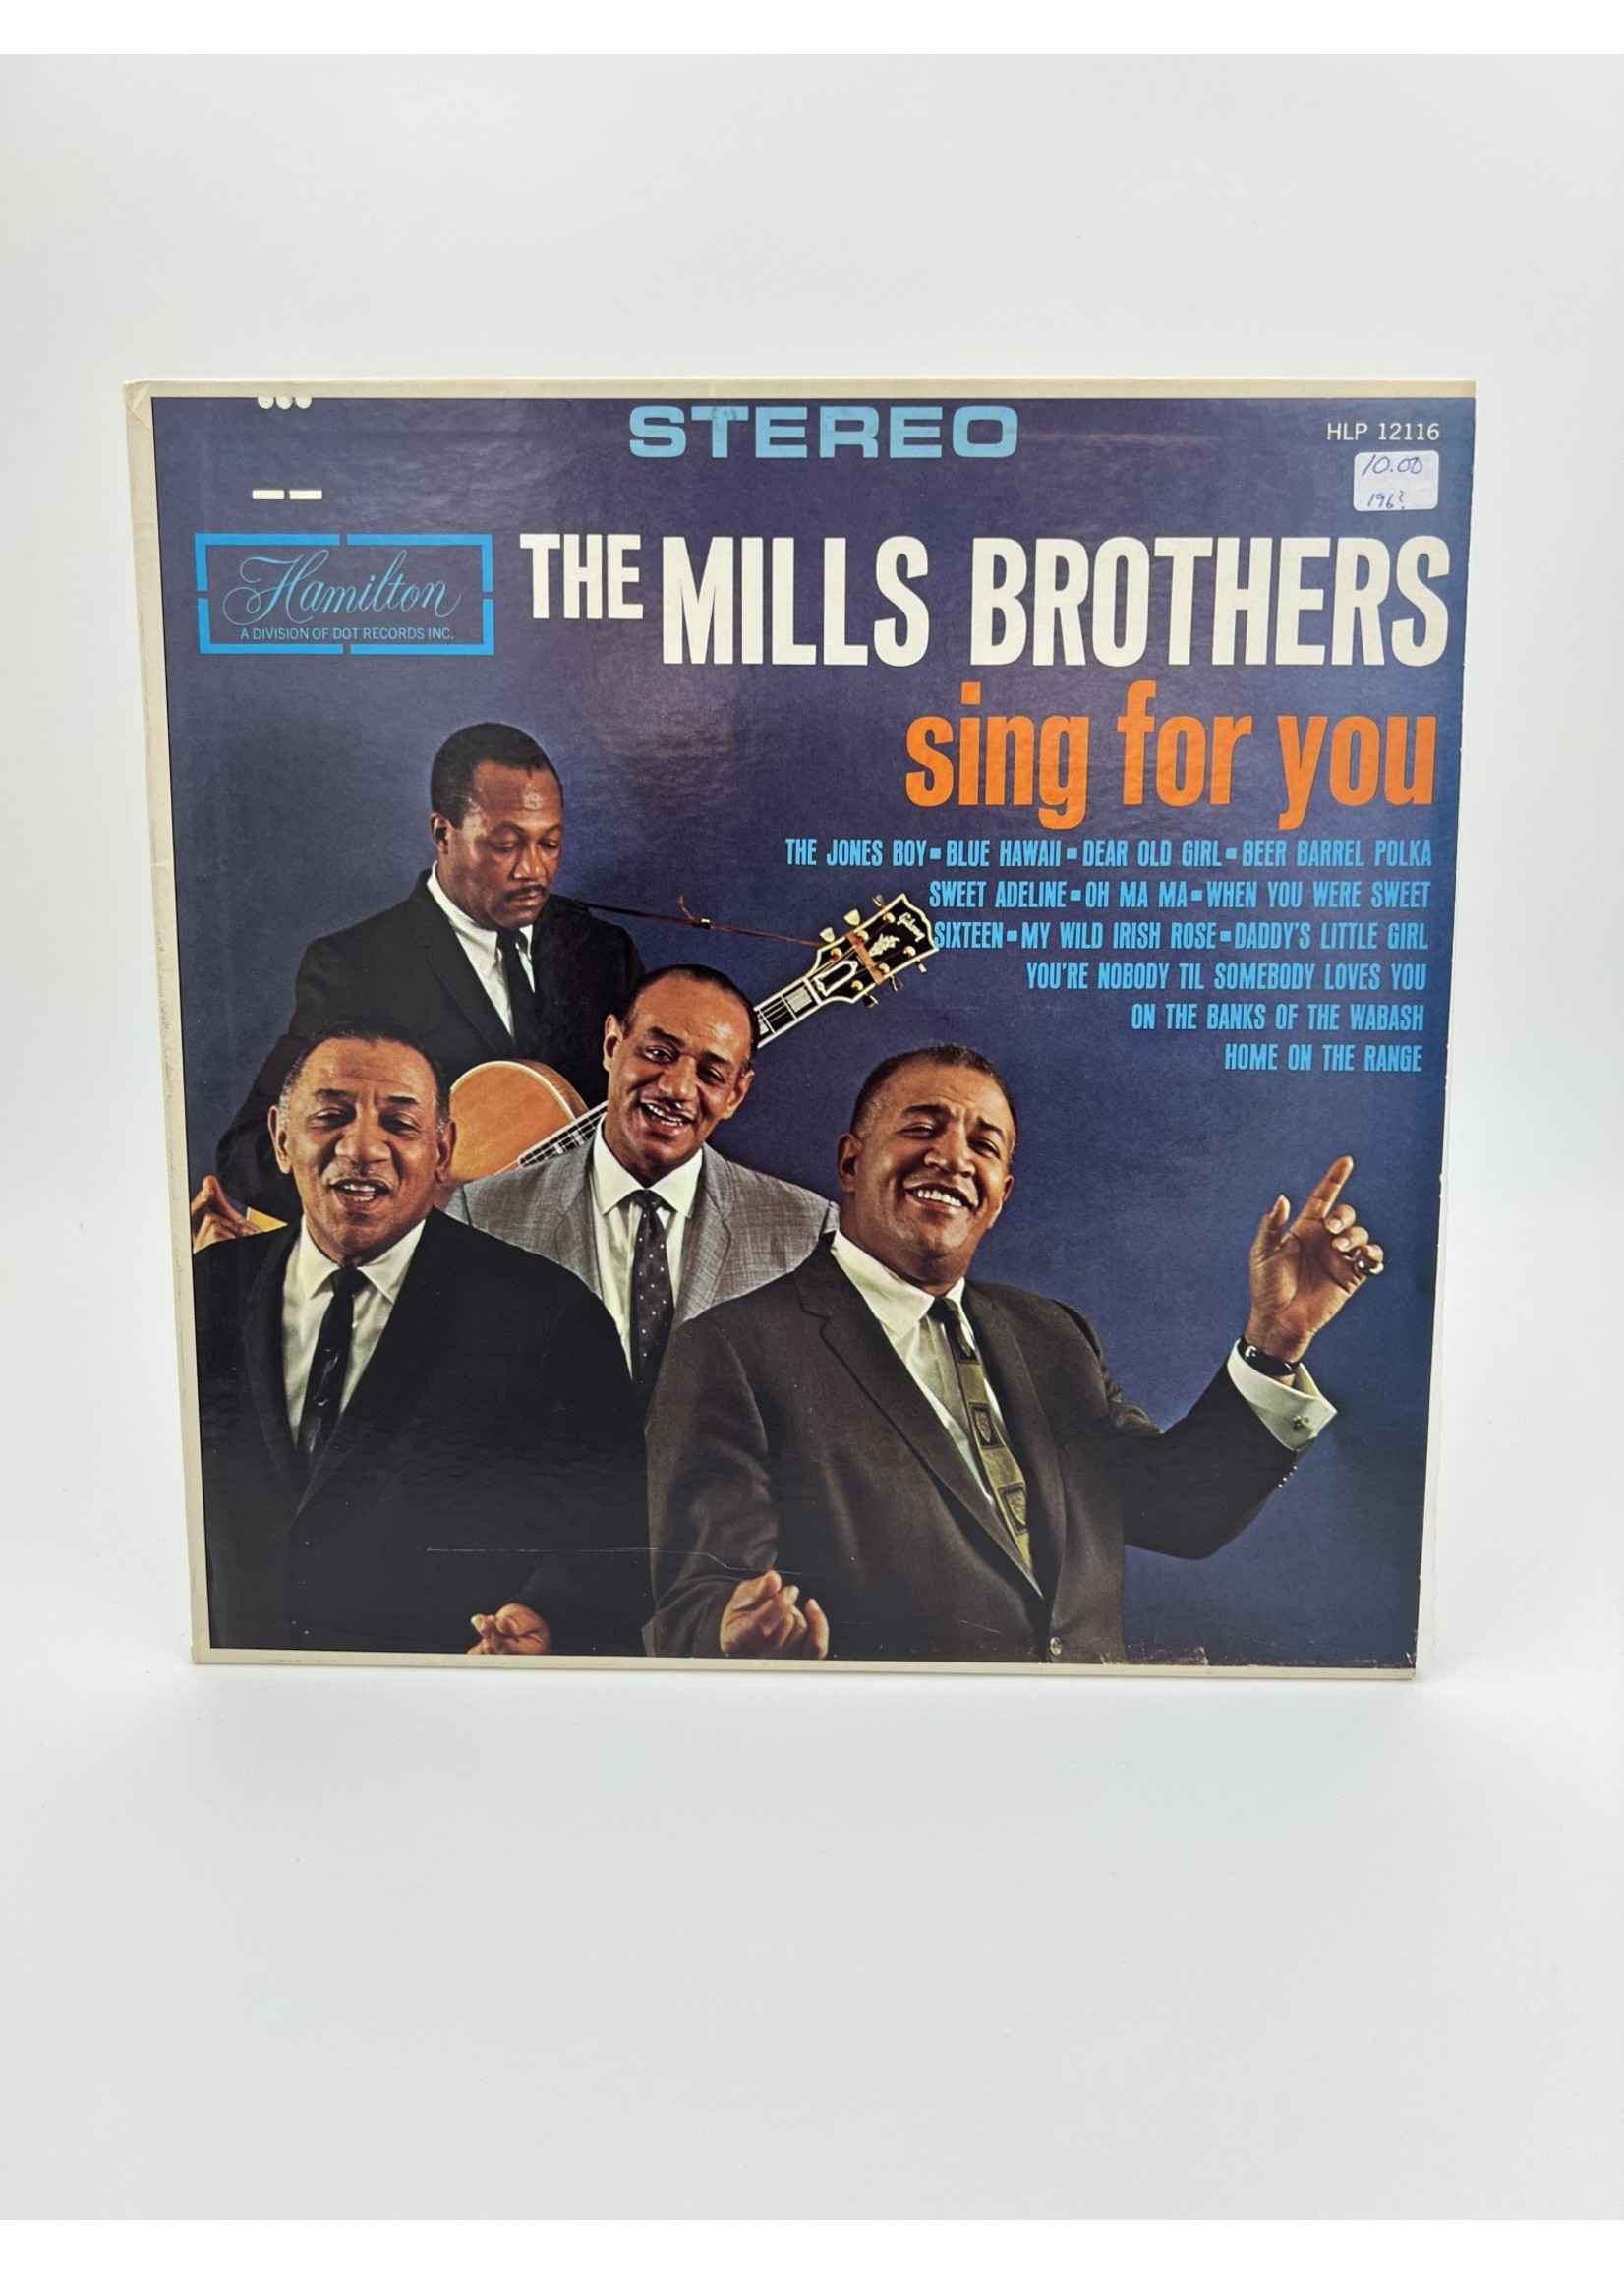 LP The Mills Brothers Sing For You LP RECORD